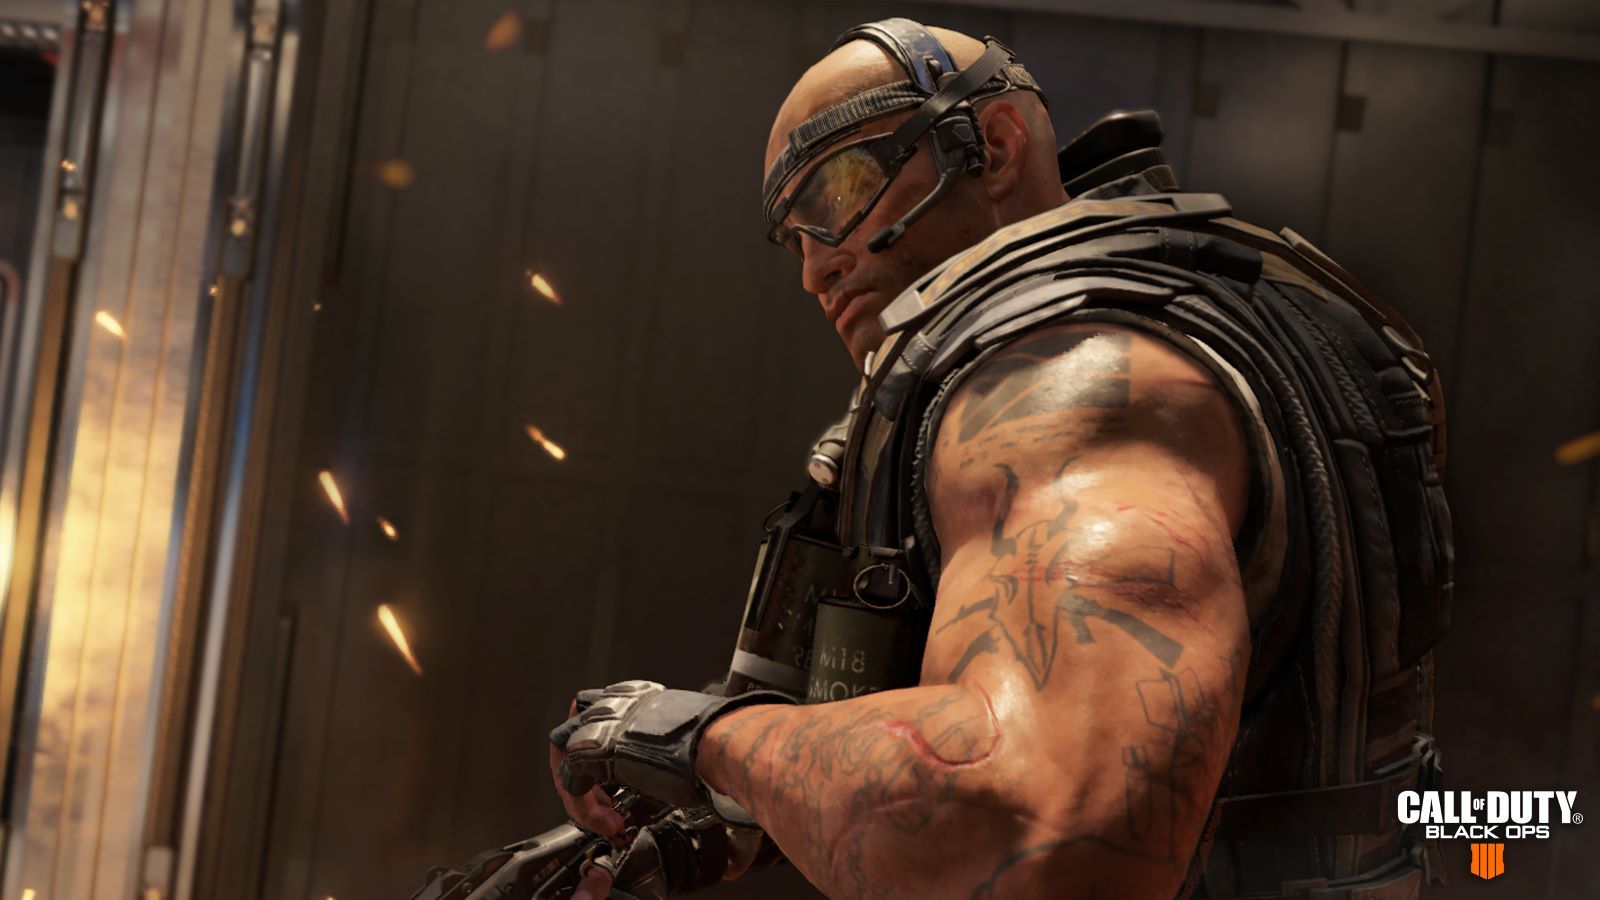 A character holding a gun from Call Of Duty Black Ops 4.